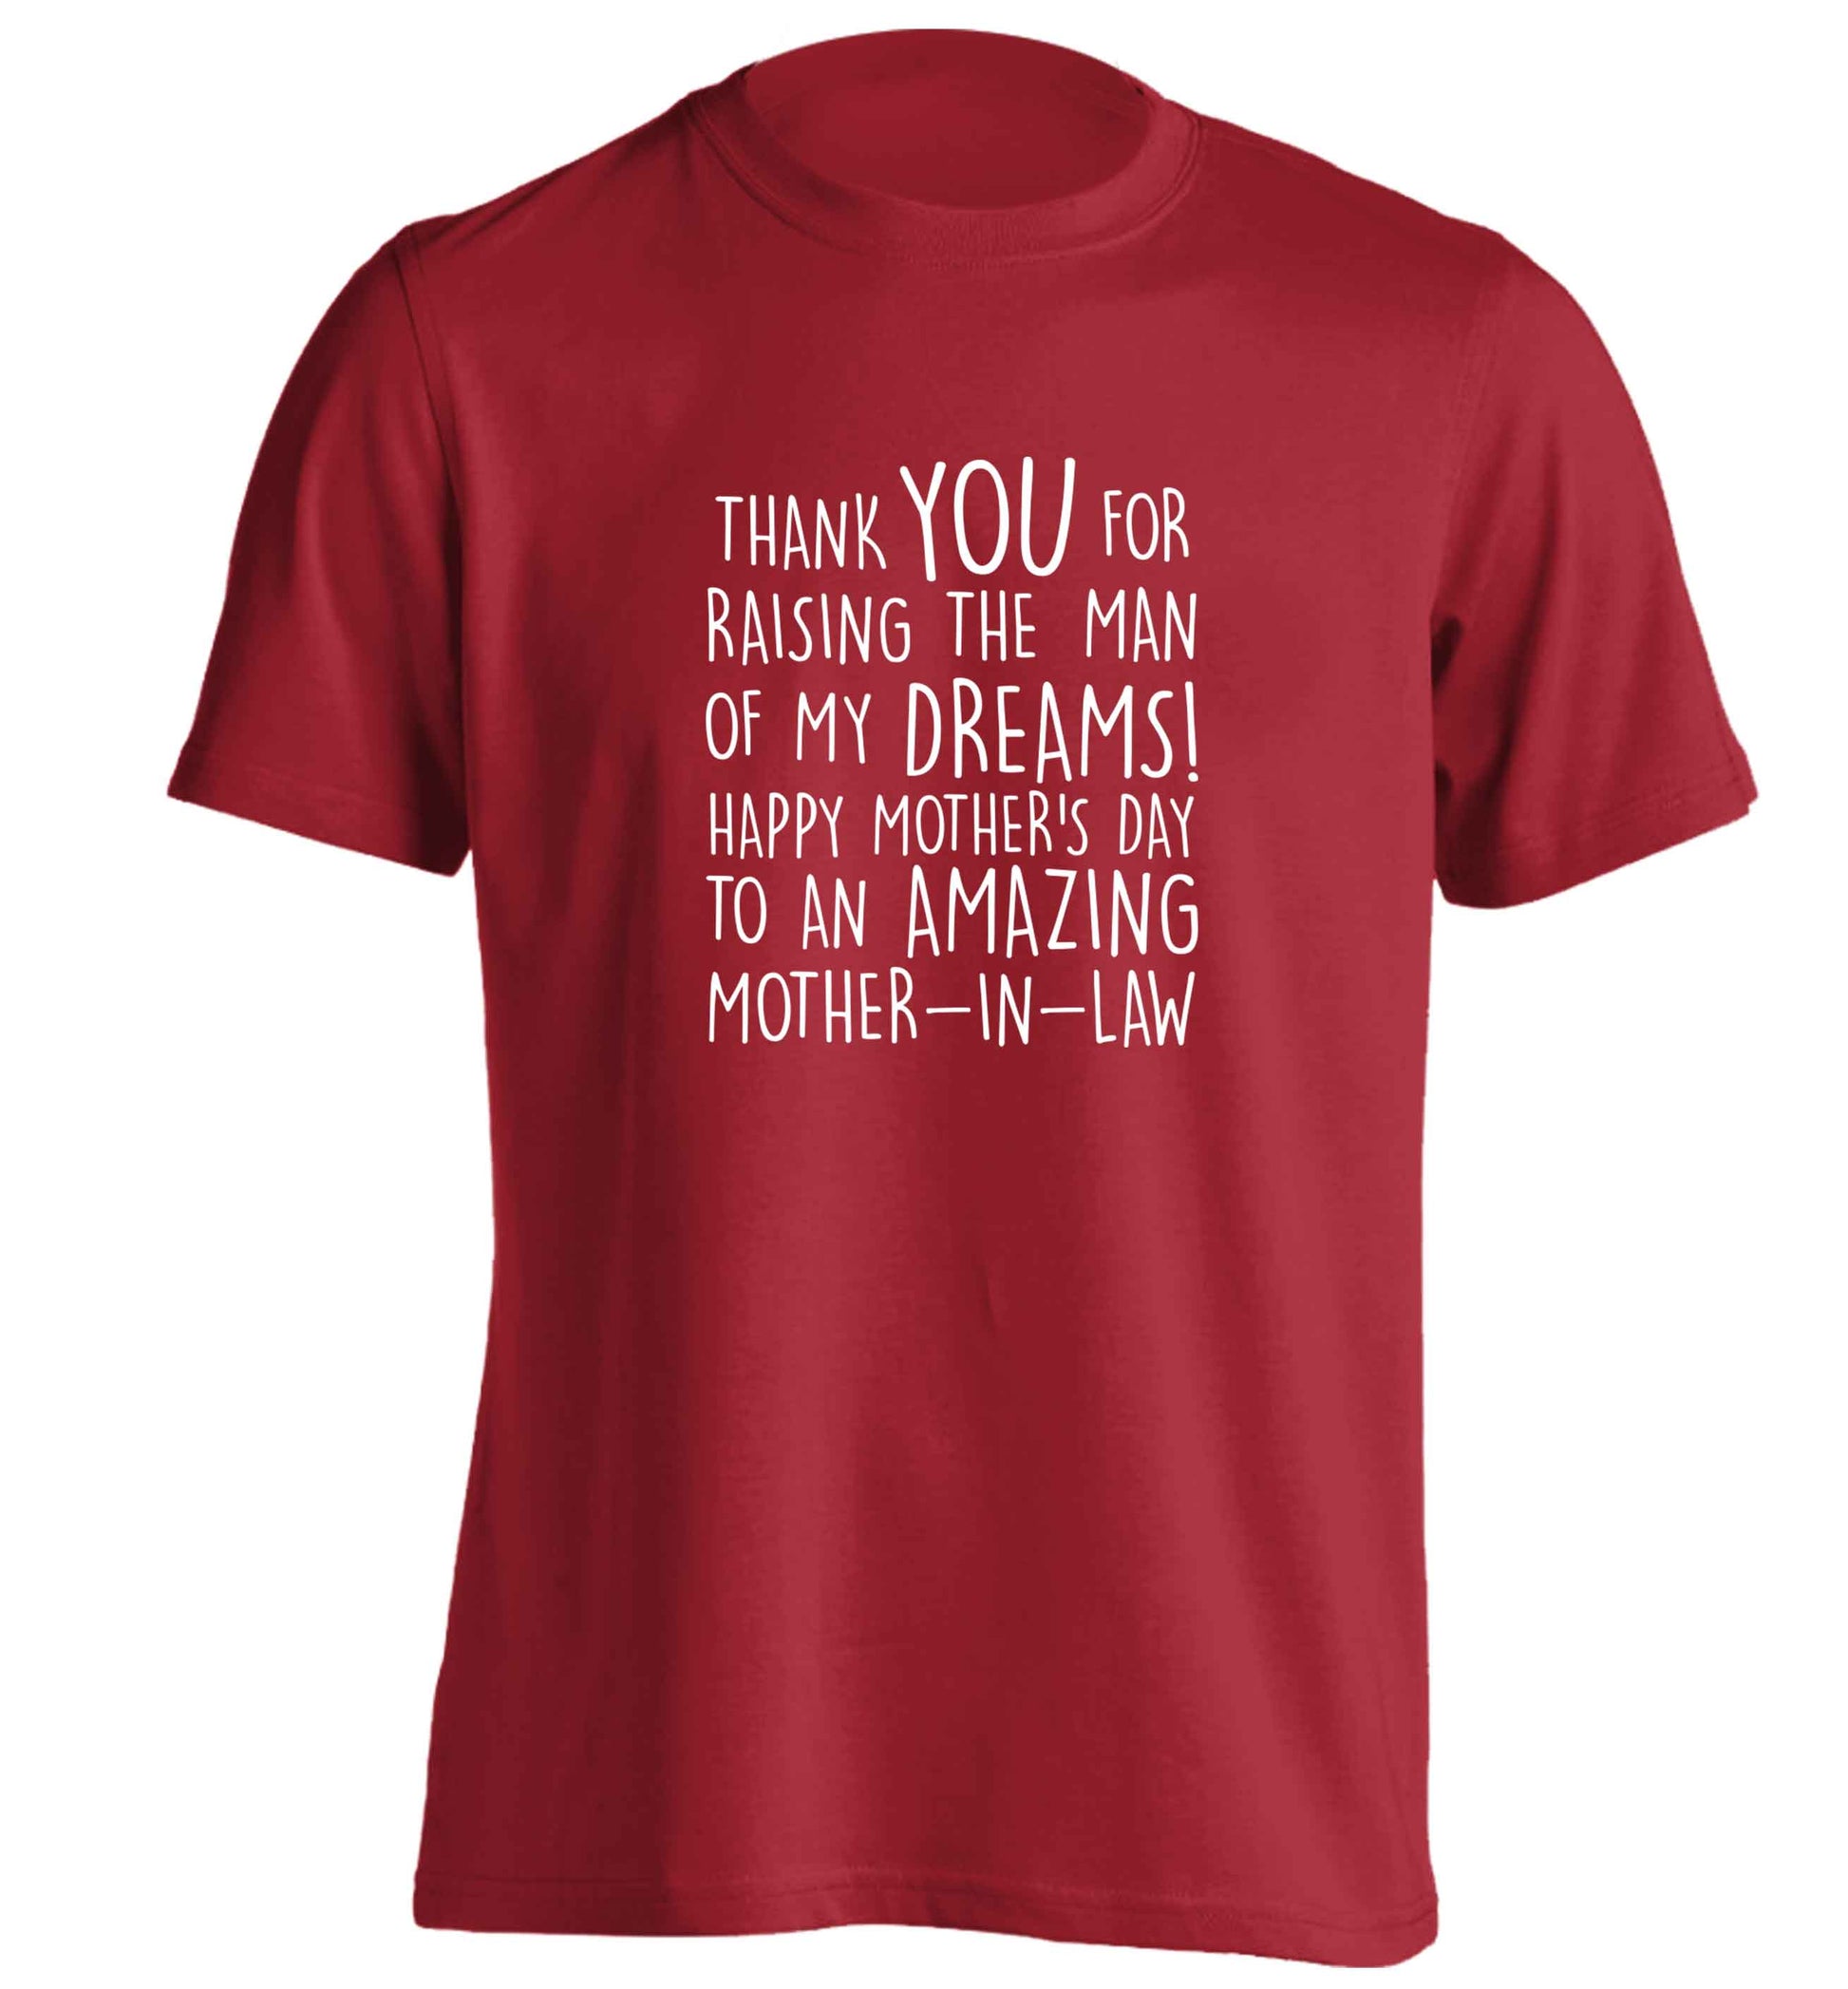 Raising the man of my dreams mother's day mother-in-law adults unisex red Tshirt 2XL